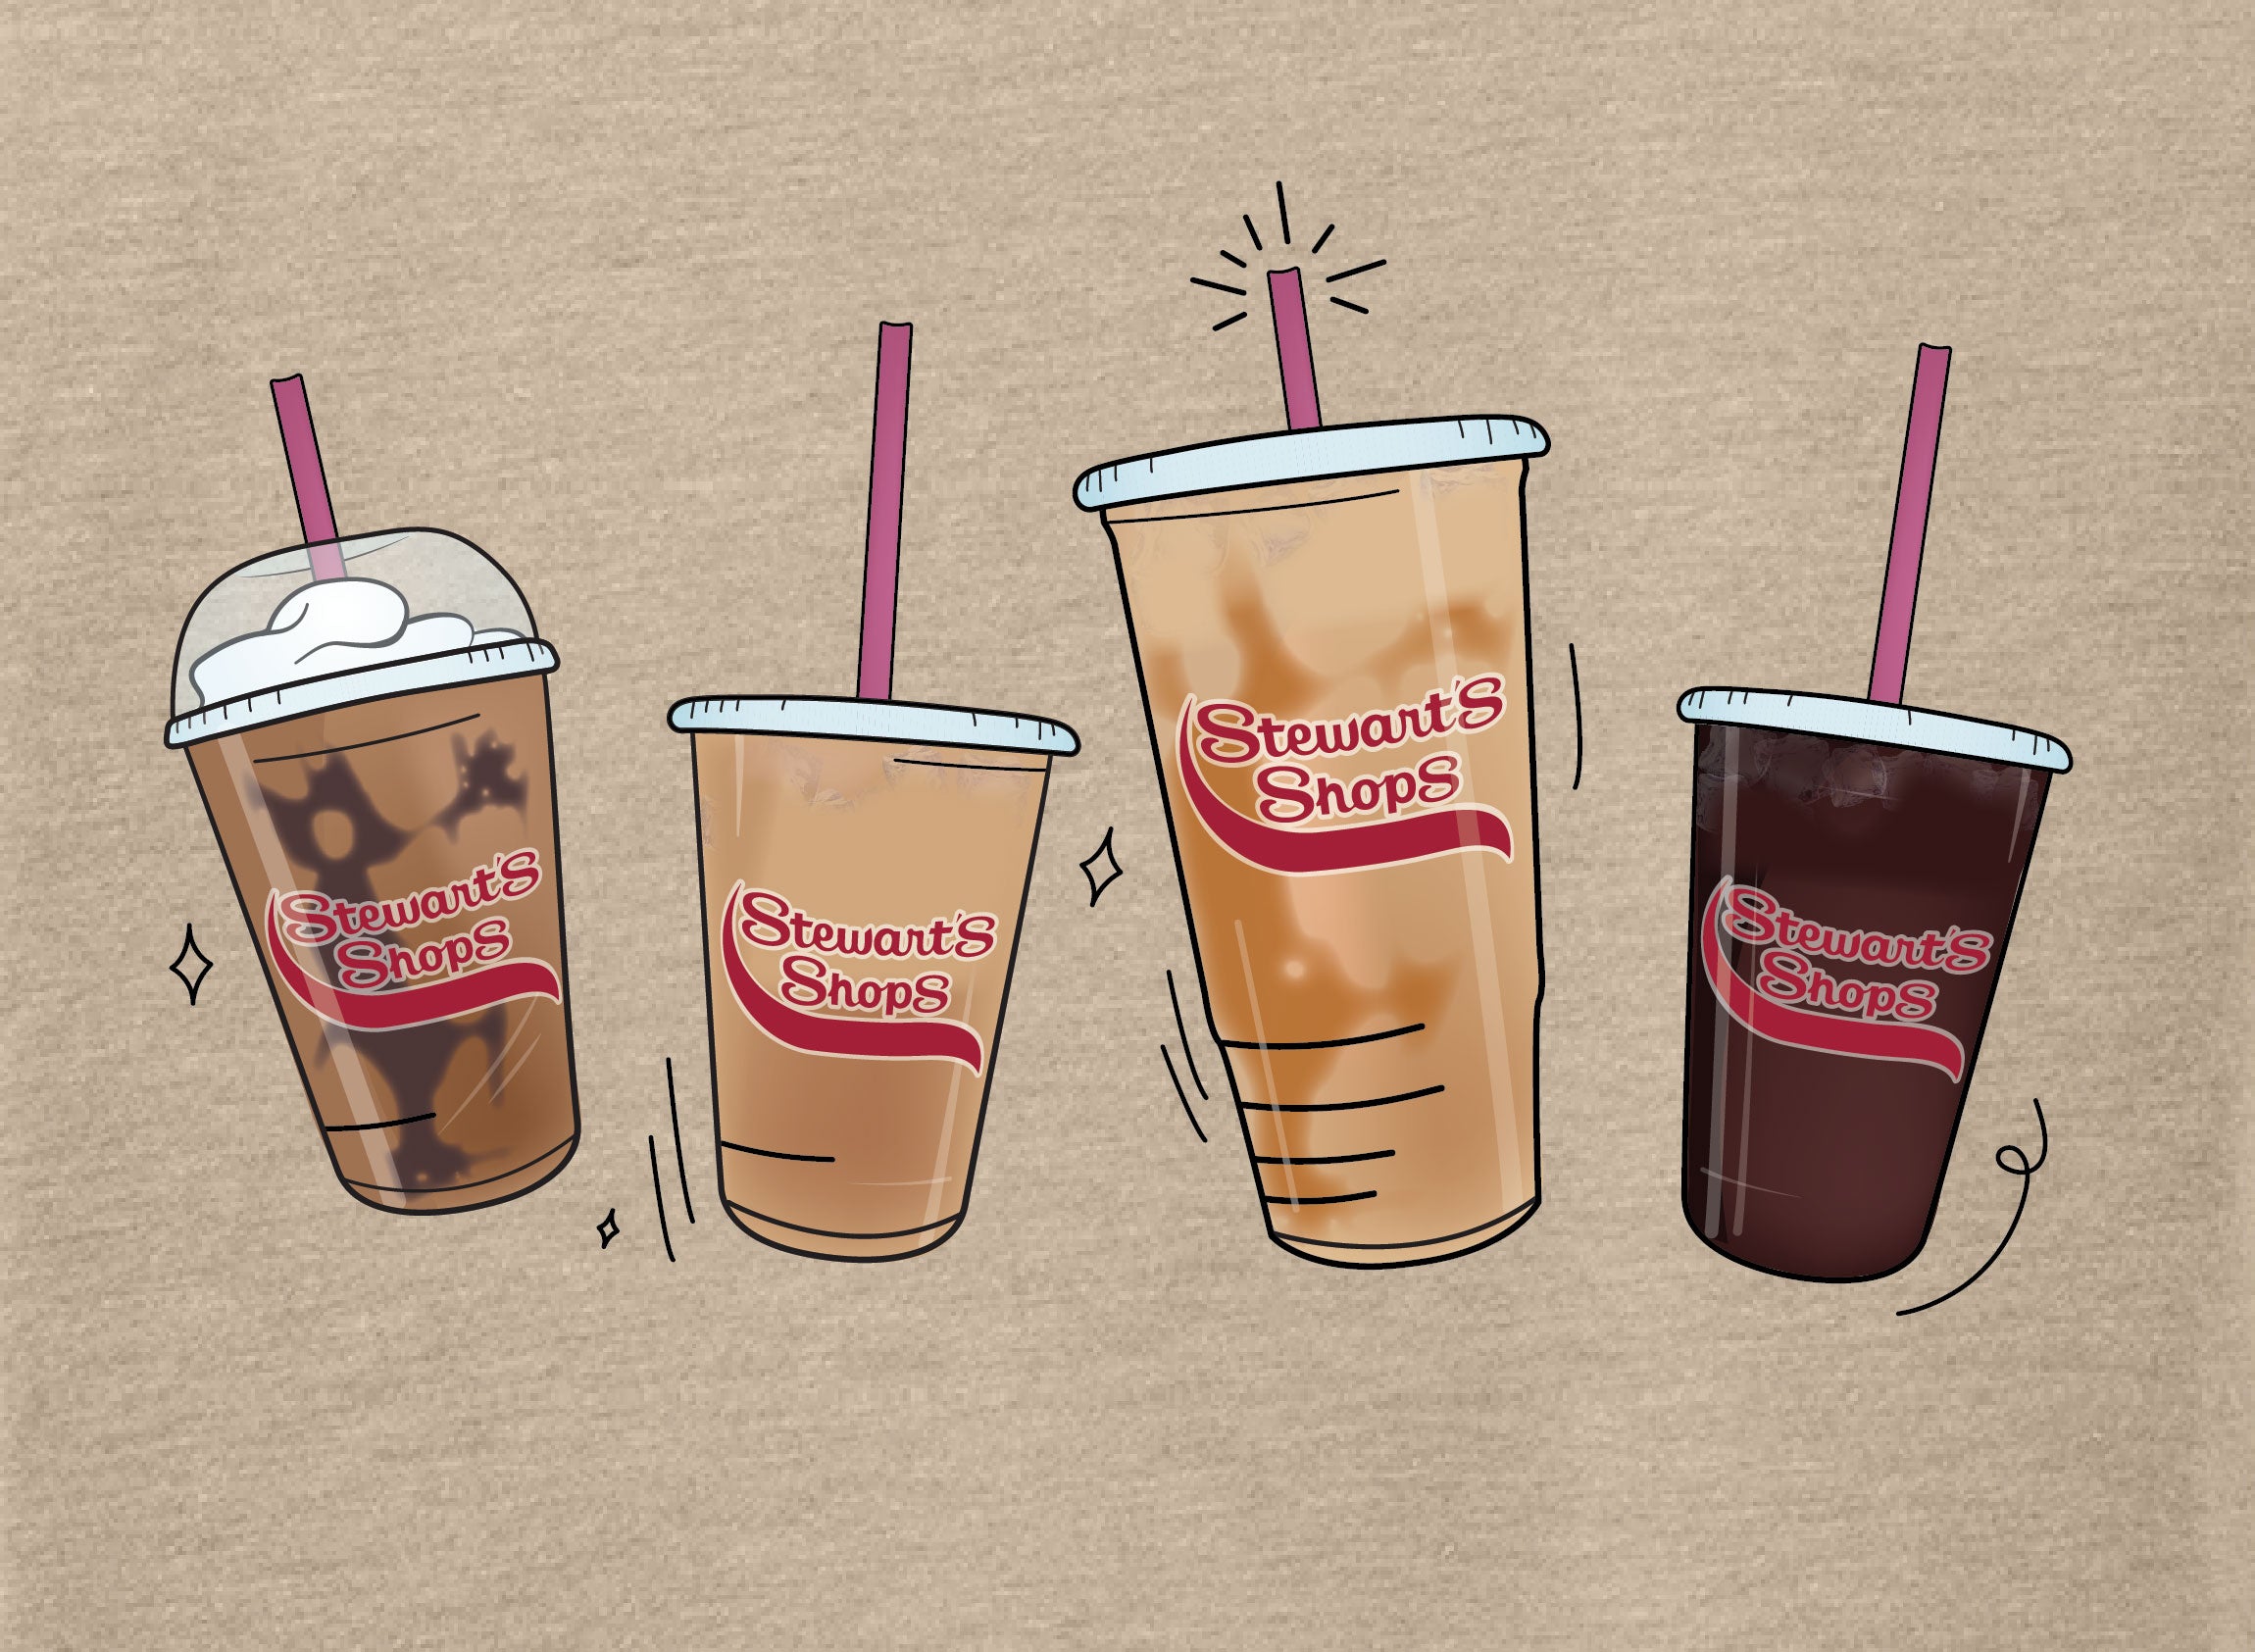 Product Image for Ladies Iced Coffee Shirt